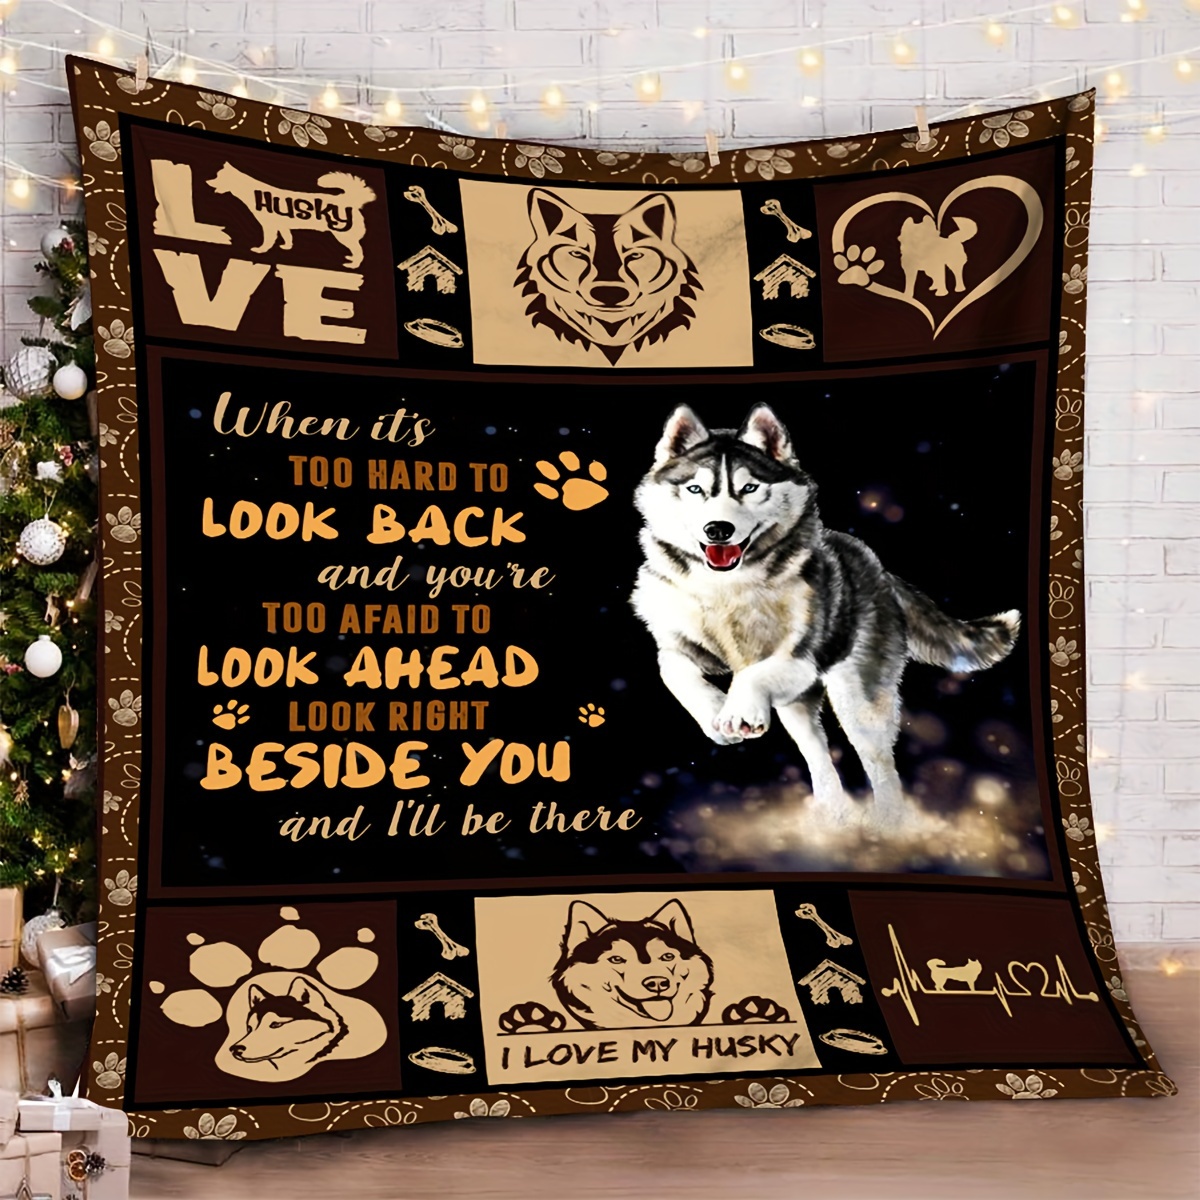 

1pc Gift Blanket For Friends Husky Creative Text Stitching Pattern Soft Blanket Flannel Blanket For Couch Sofa Office Bed Camping Travel, Multi-purpose Gift Blanket For All Season